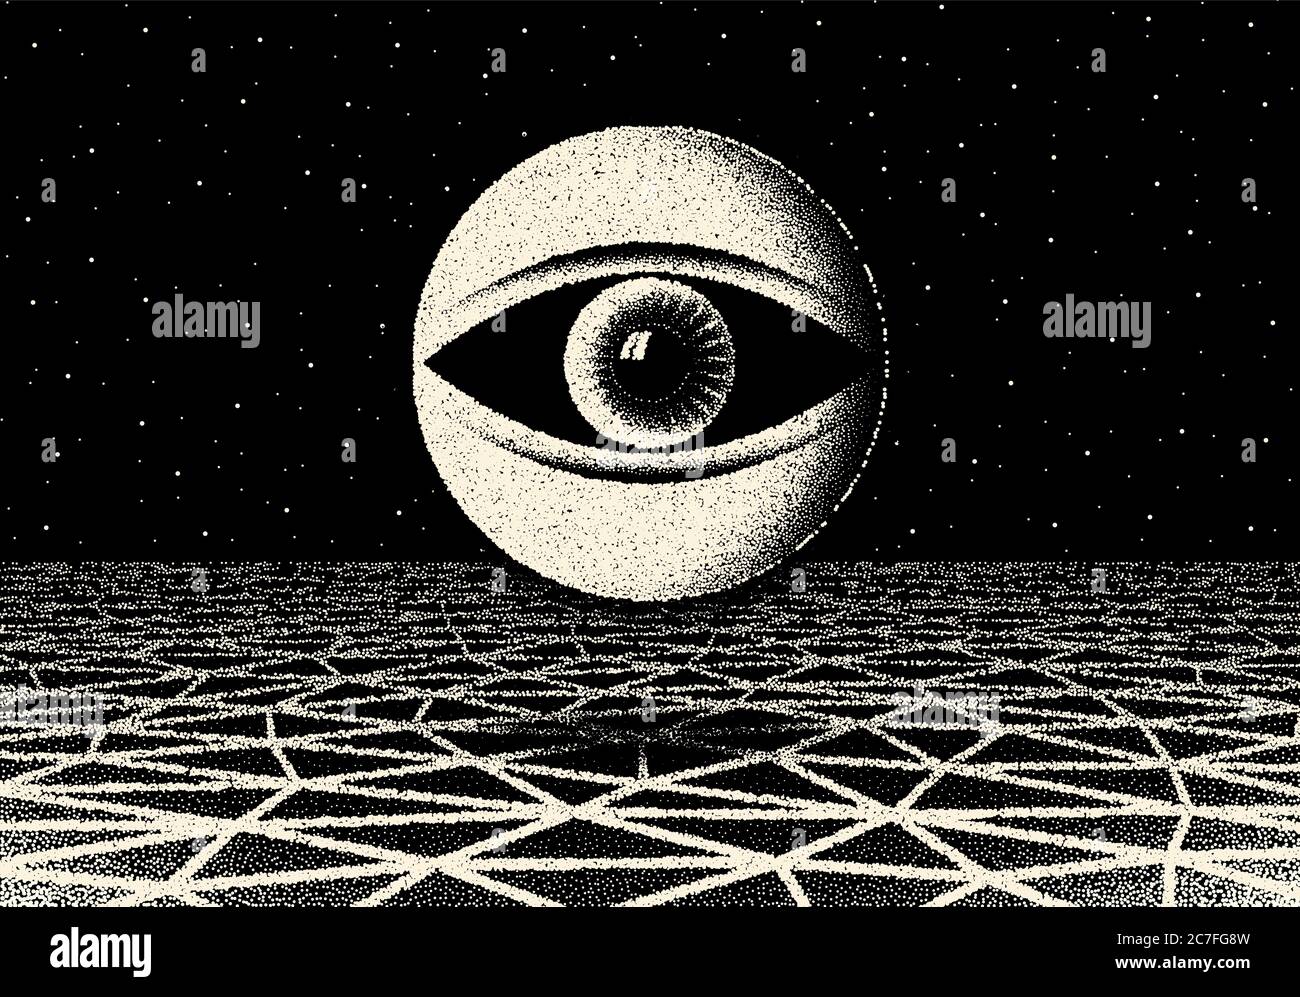 Retro dotwork landscape with 60s or 80s styled alien robotic space eye over the desert planet on the background with old sci-fi style Stock Vector